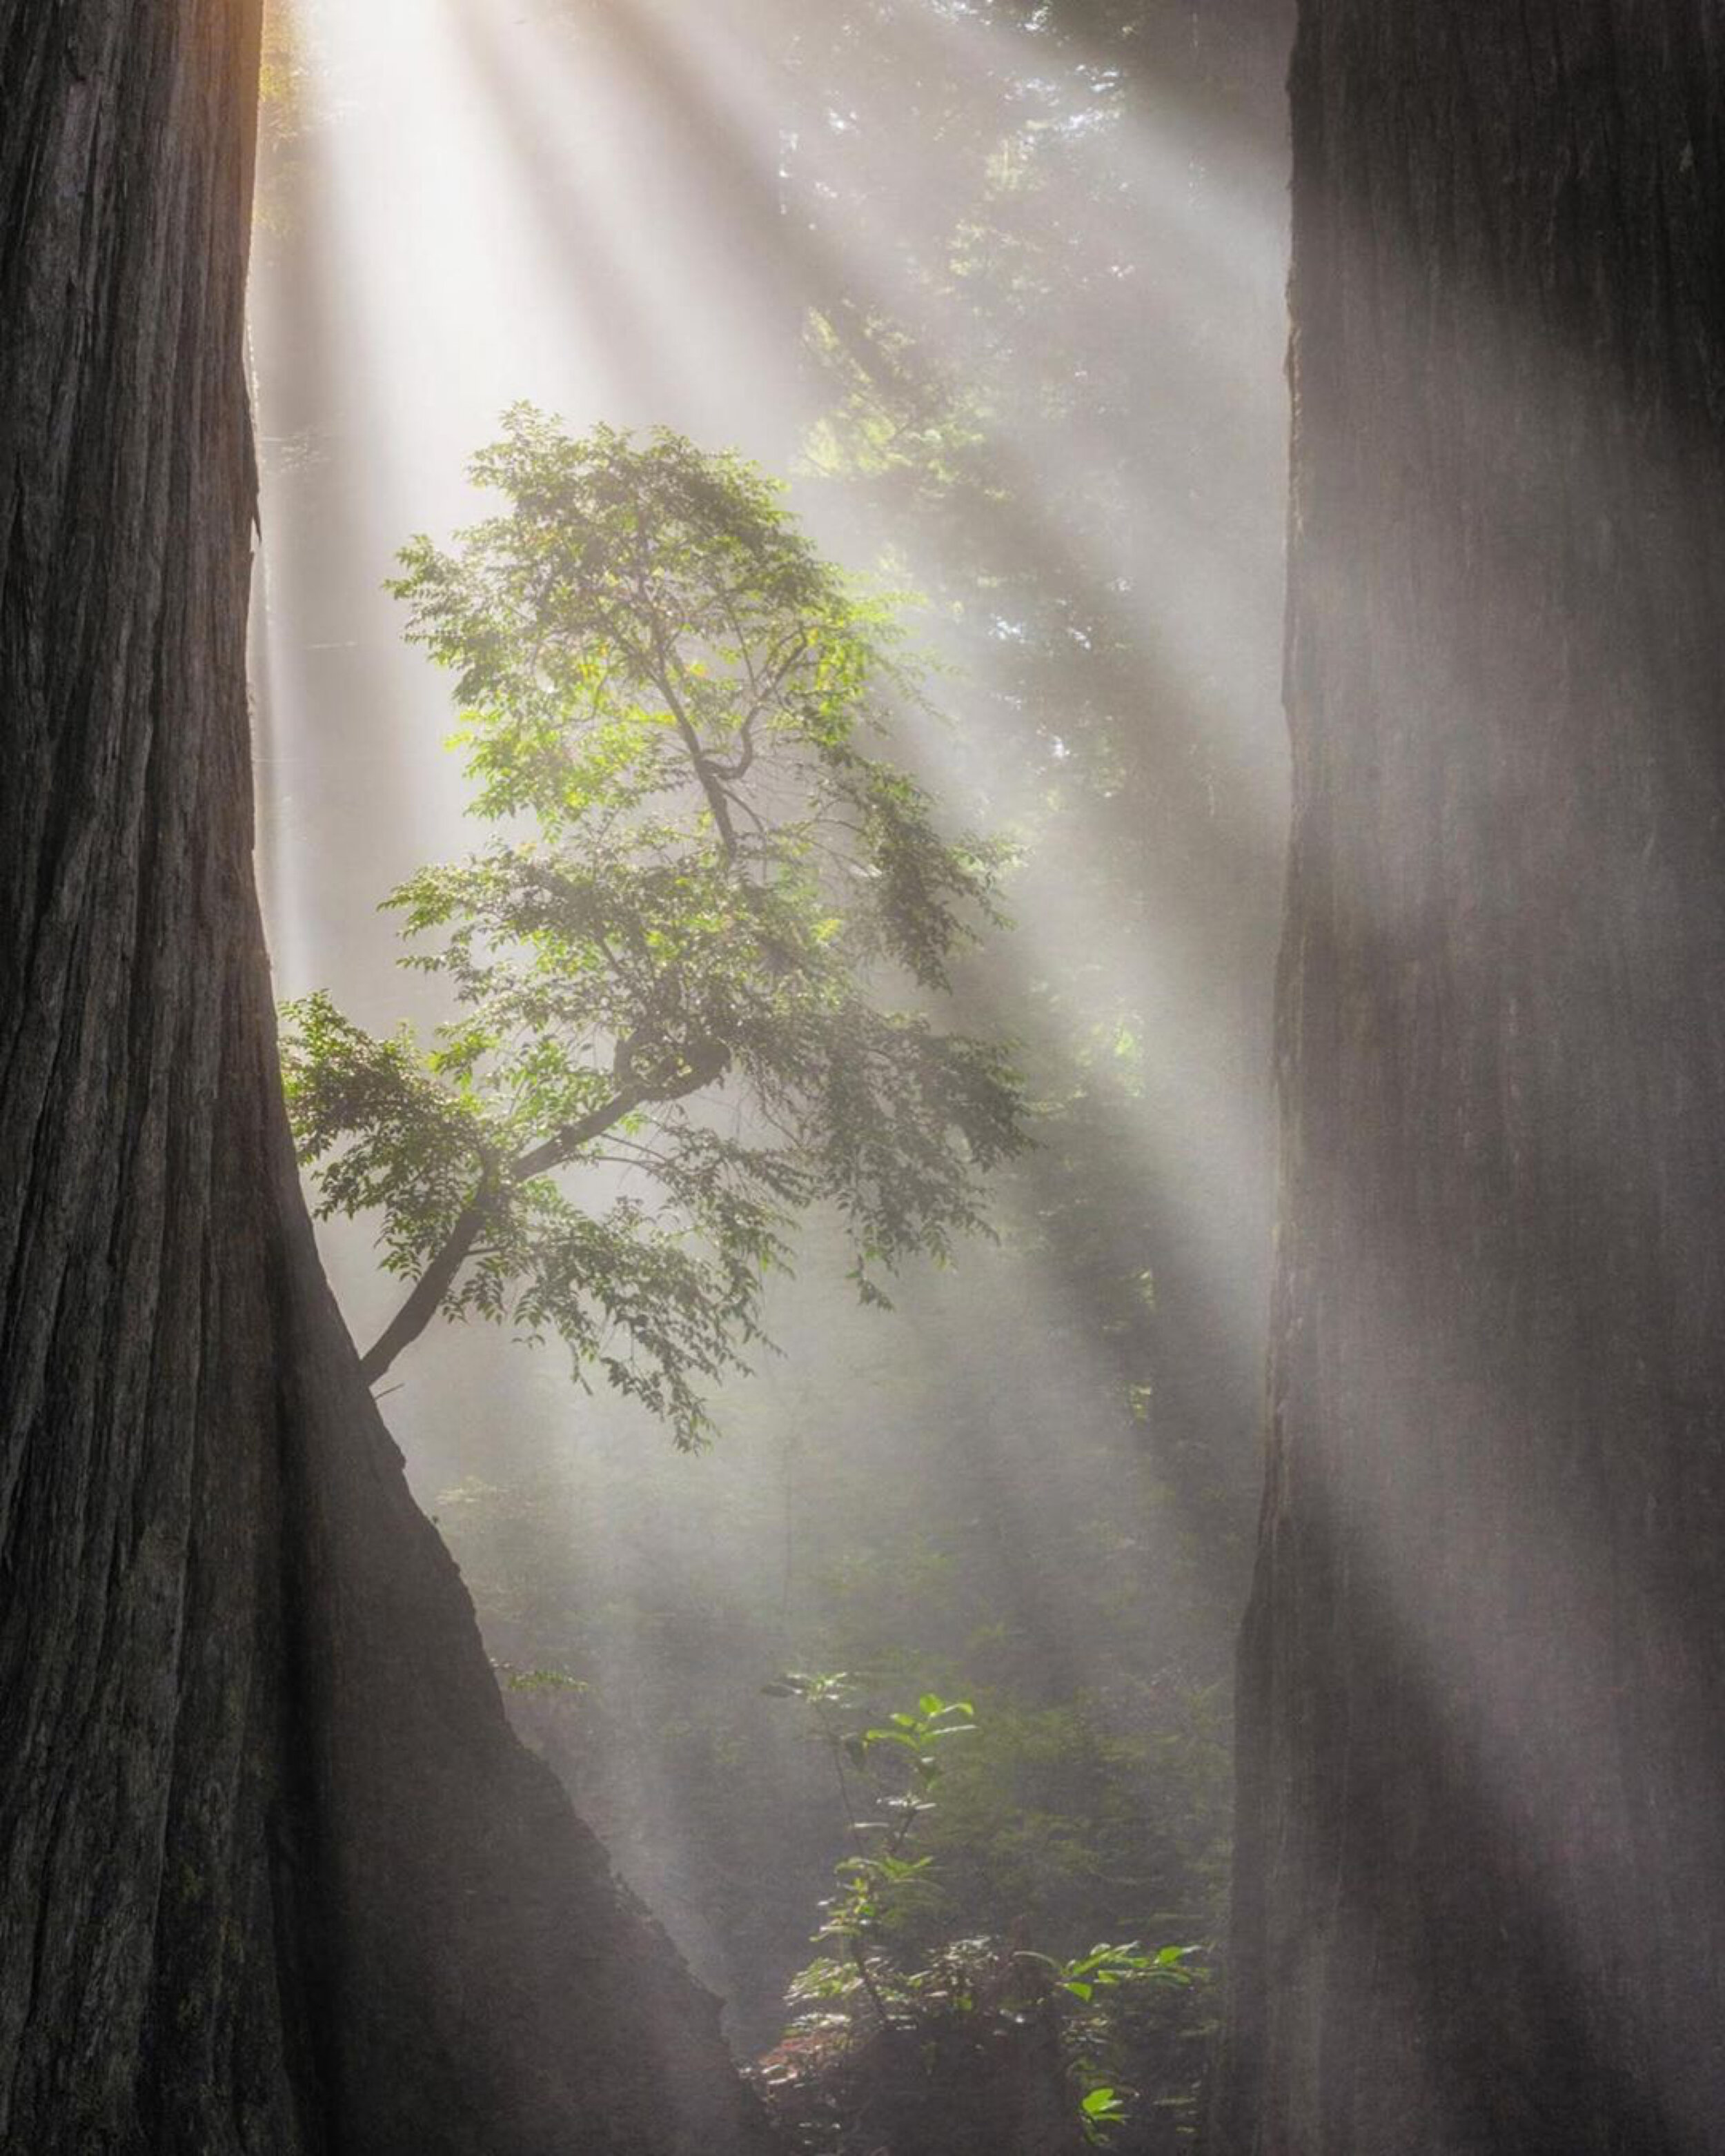 California Redwoods Rhododendron by Photography Workshop Student